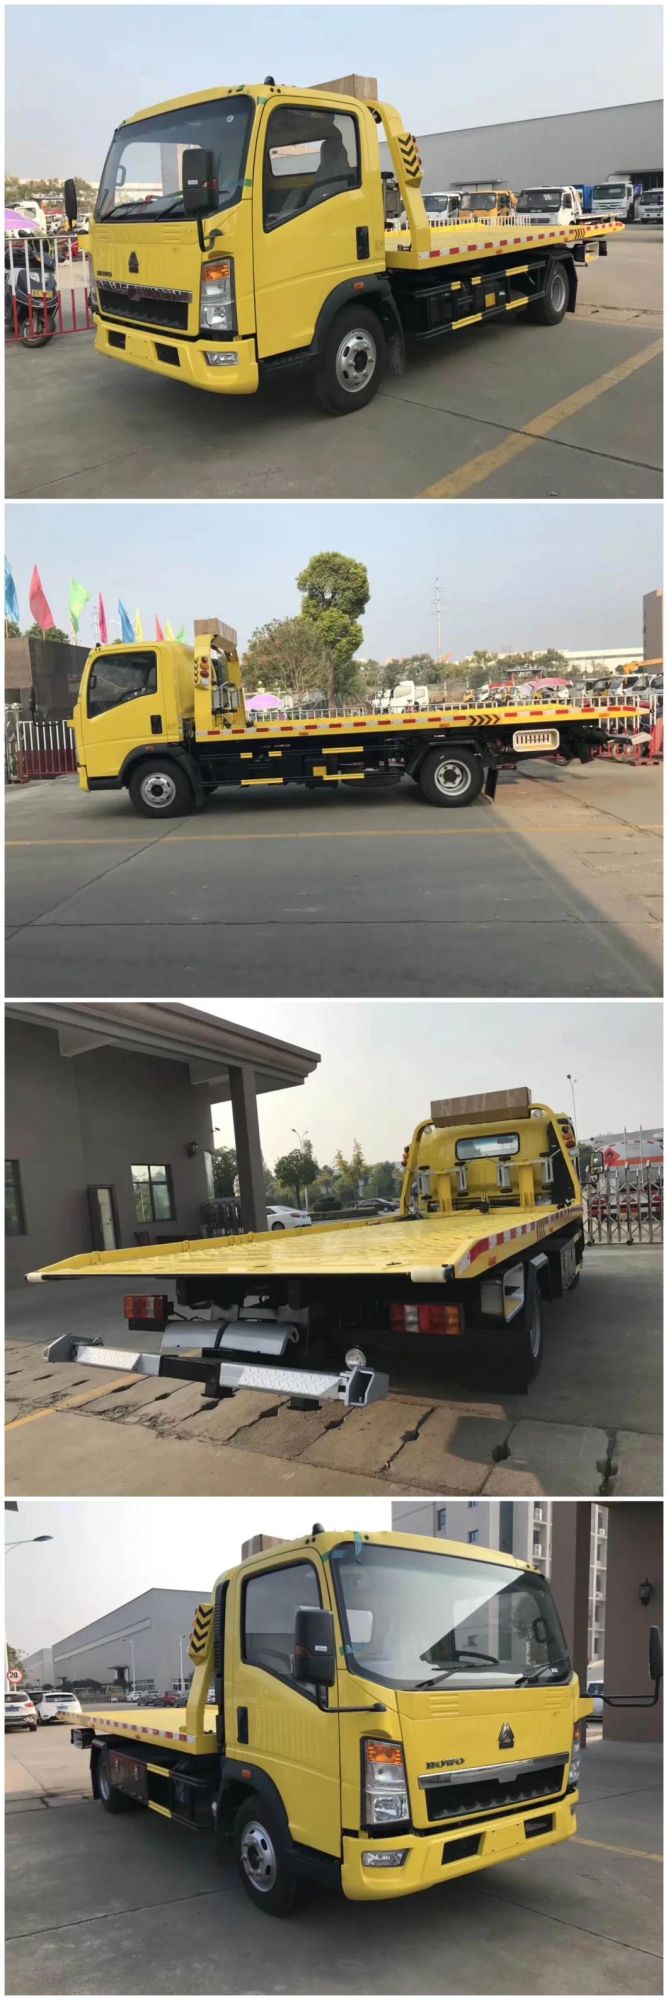 Under Lift Rollback Recovery Rescue Block Cars Tow Truck, 5 Ton 6 Ton 8 Ton Wrecker Tow Truck for Sale